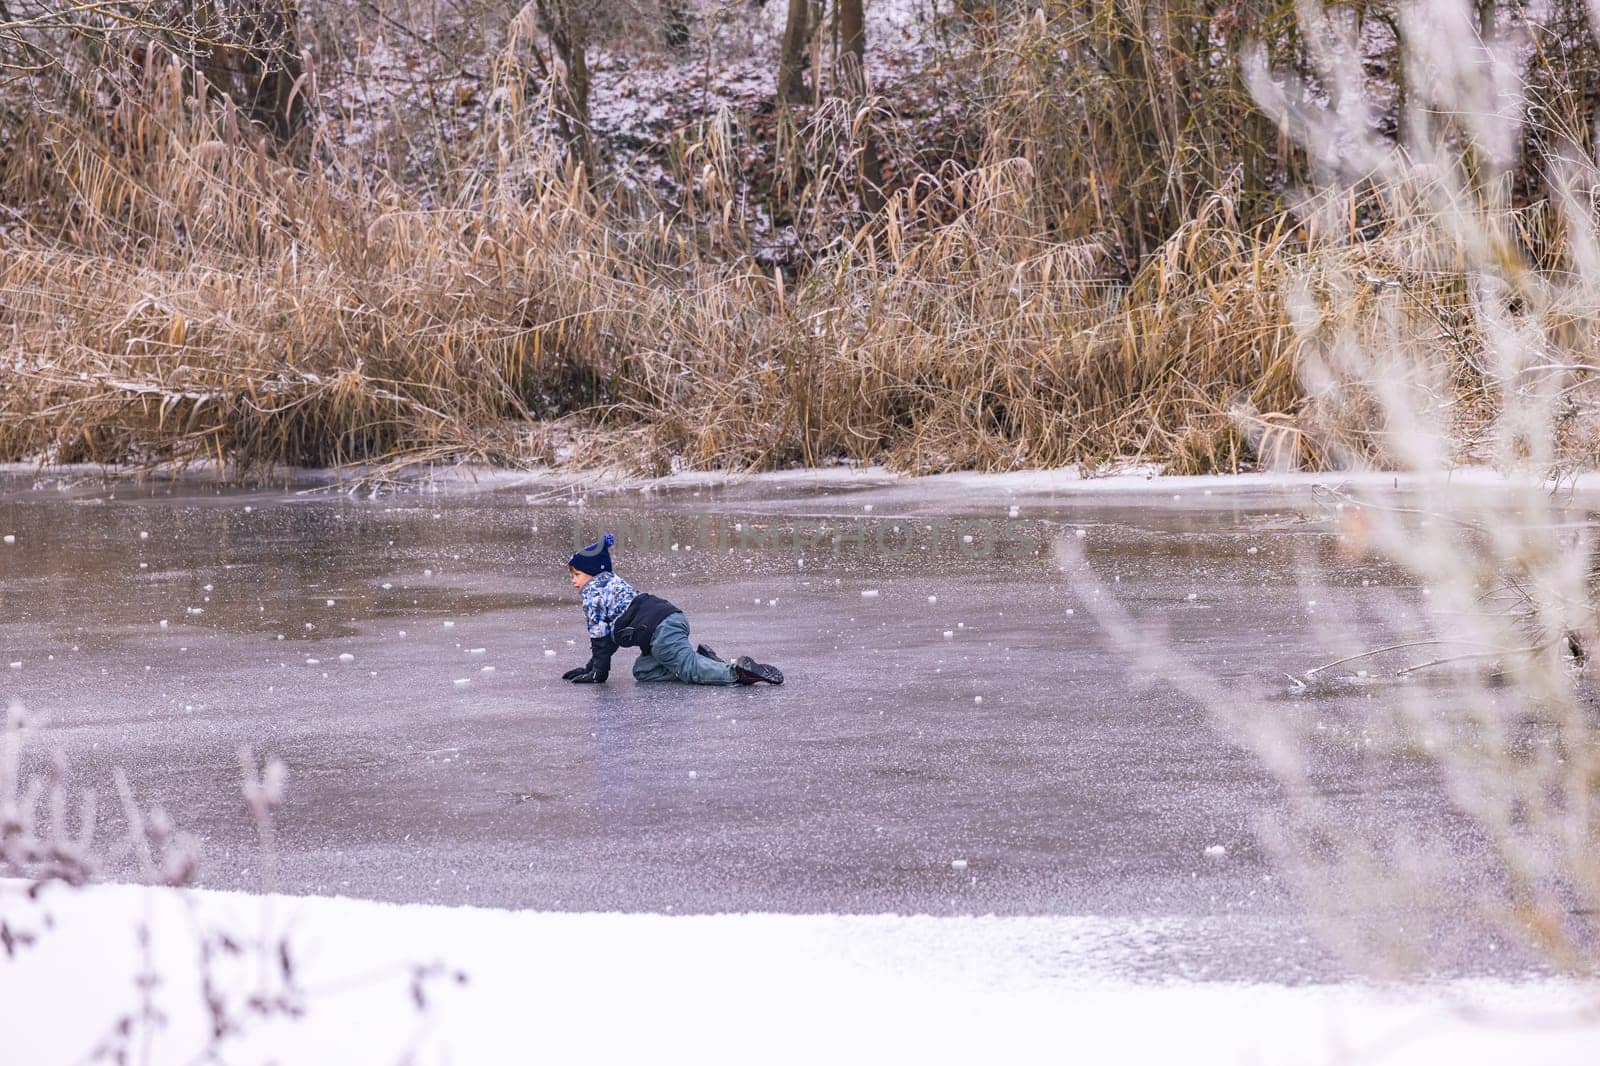 A child on a frozen lake in winter is risky and life-threatening, Riedstadt, December 18th, 2022